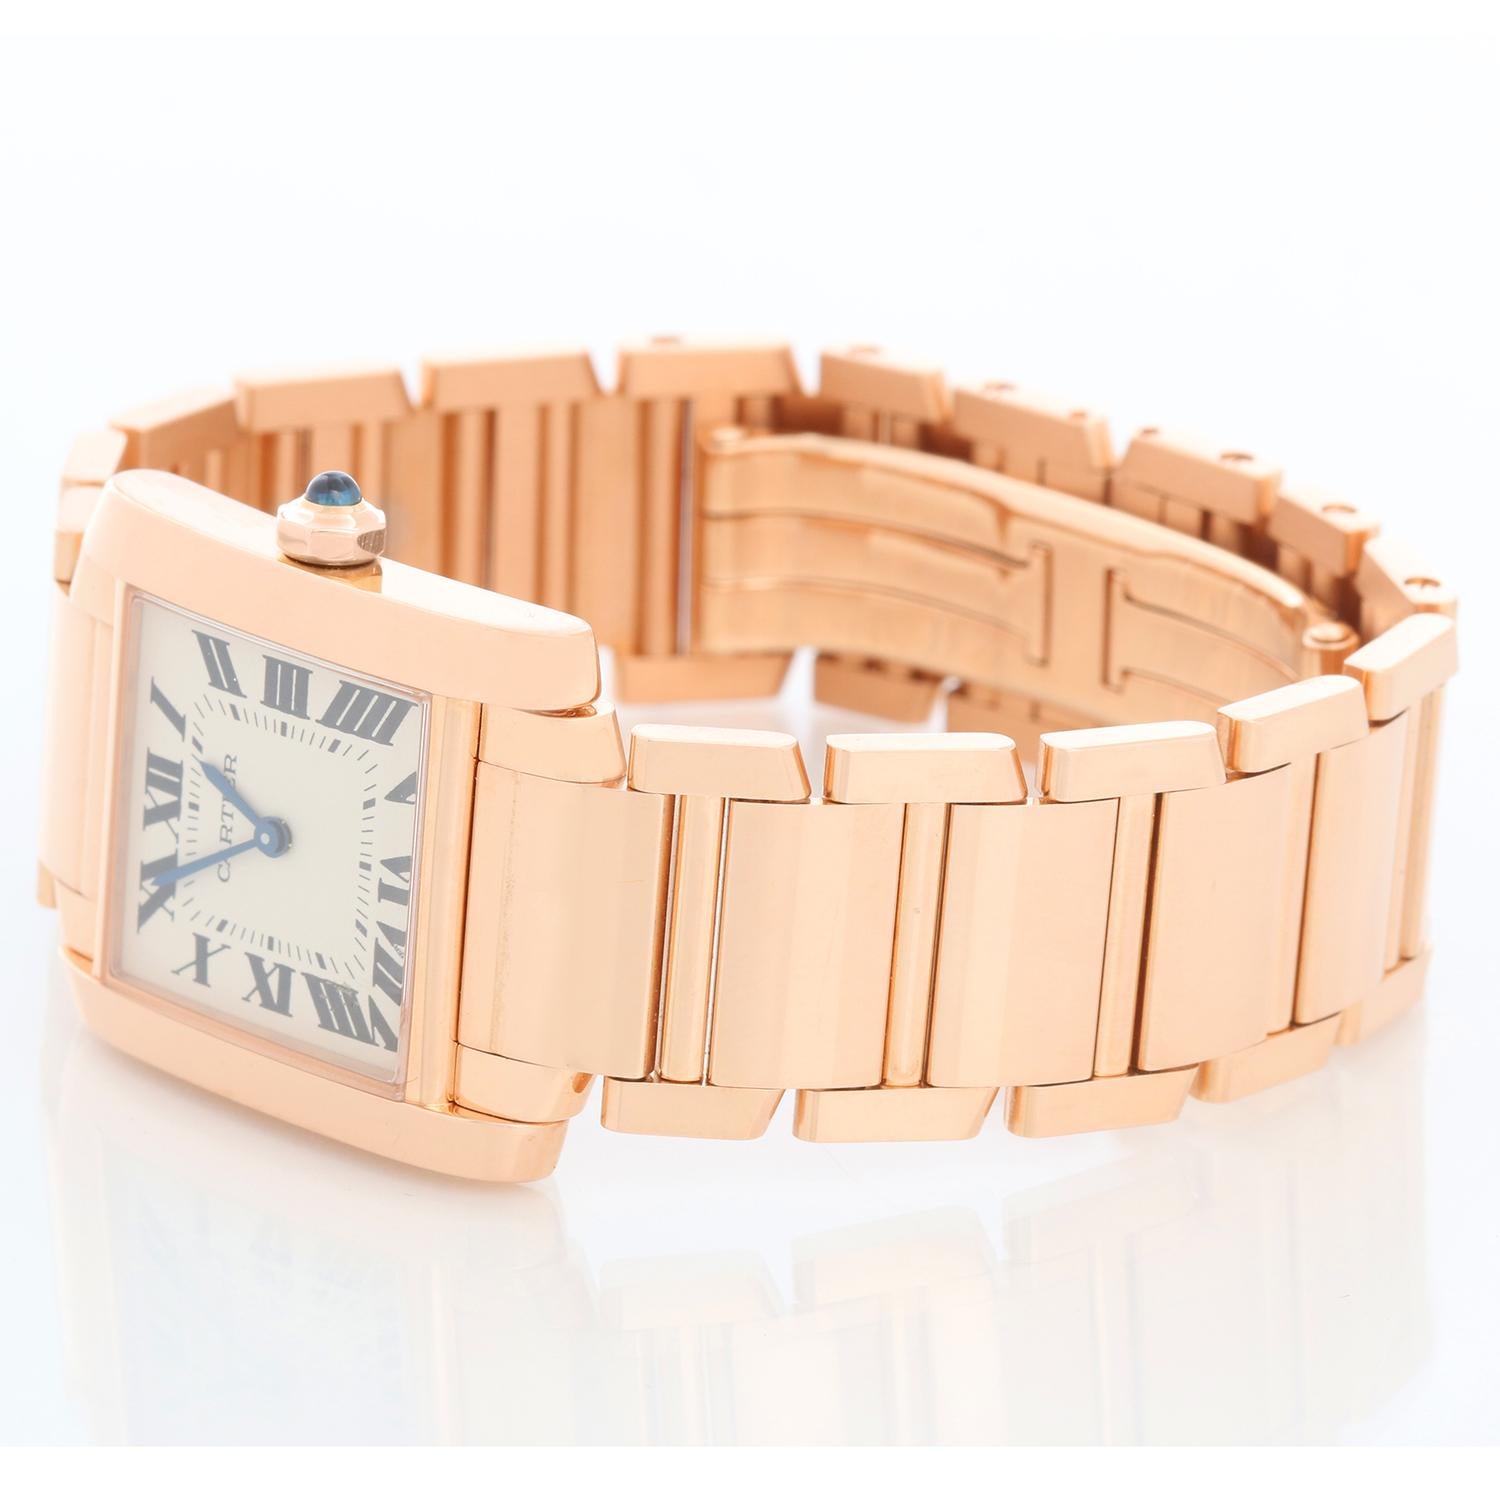 Cartier Tank Francaise Midsize 18k Rose Gold Watch WGTA0030 - Quartz. 18k rose gold  case; blue sapphire cabochon crown (25mm x 30mm).  Ivory colored dial with black Roman numerals; date at 3 o'clock. Cartier 18k rose gold bracelet; will fit a 6 3/4